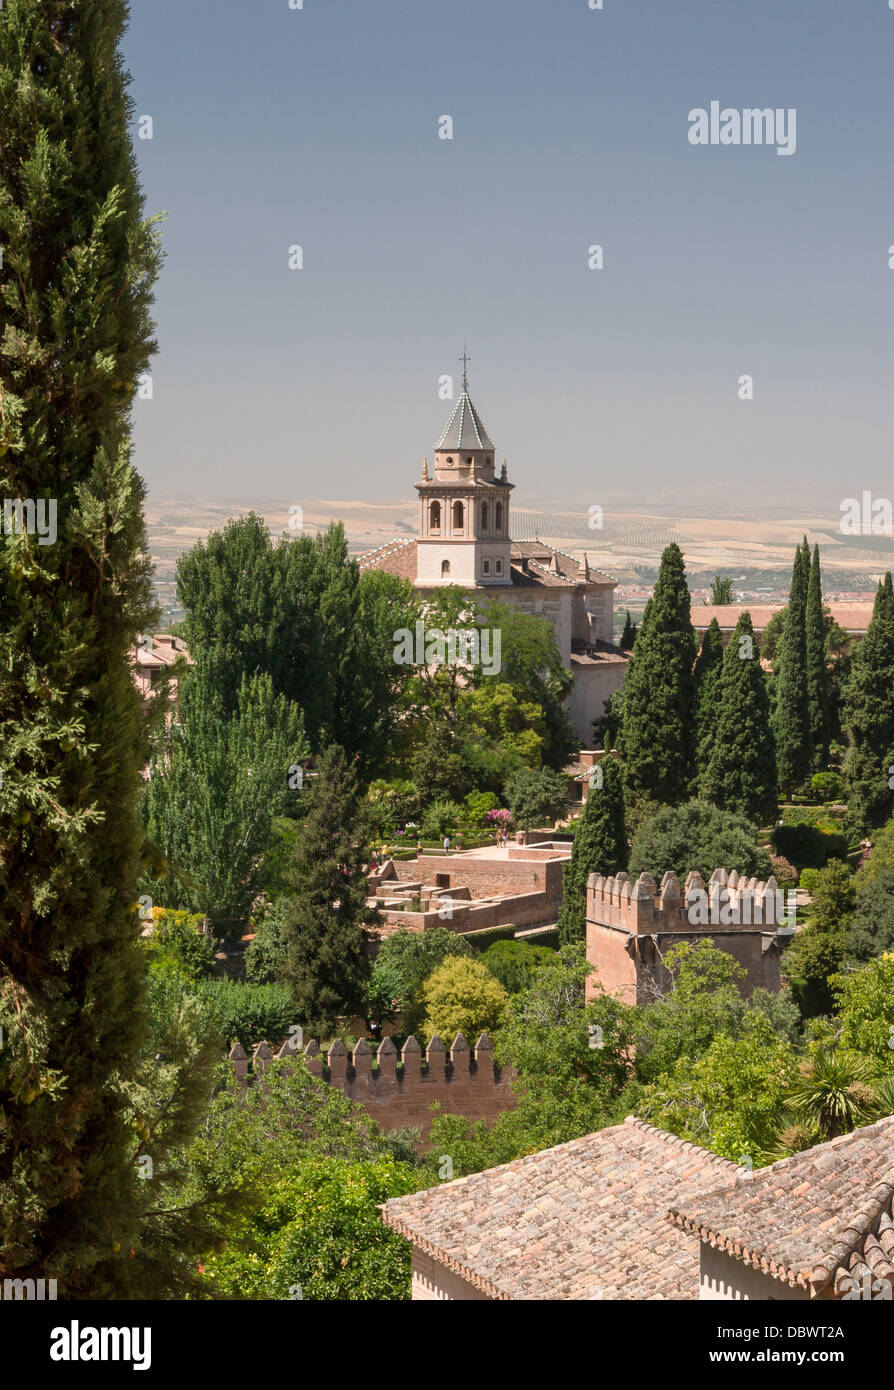 The church of the Alhambra, as seen from the 'Generalife', Granada, Spain. Stock Photo